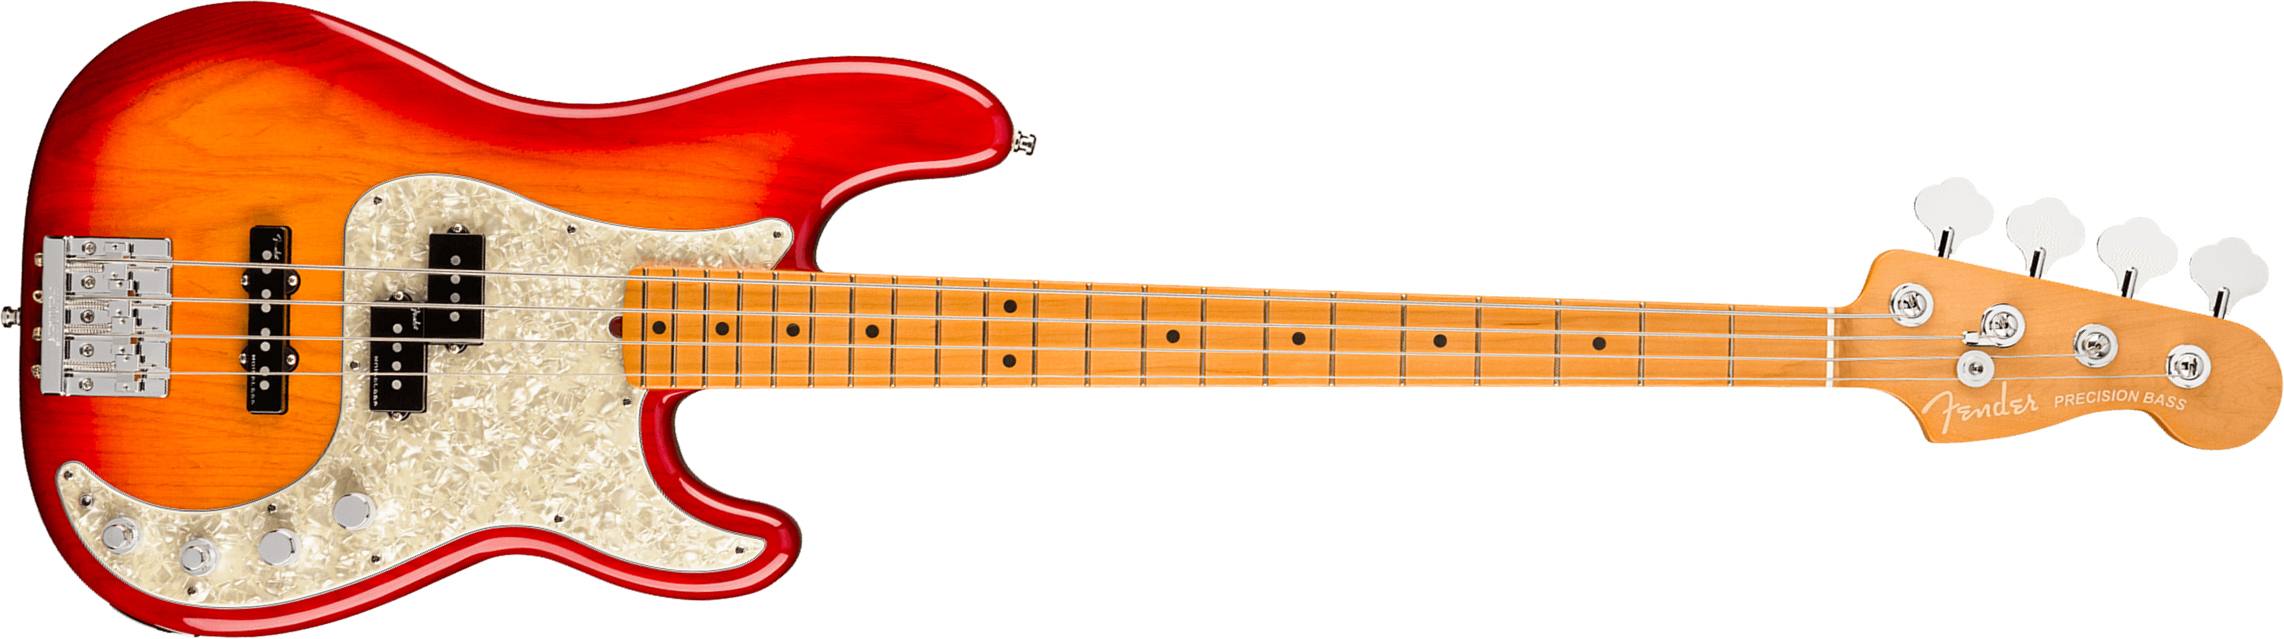 Fender Precision Bass American Ultra 2019 Usa Mn - Plasma Red Burst - Solid body electric bass - Main picture